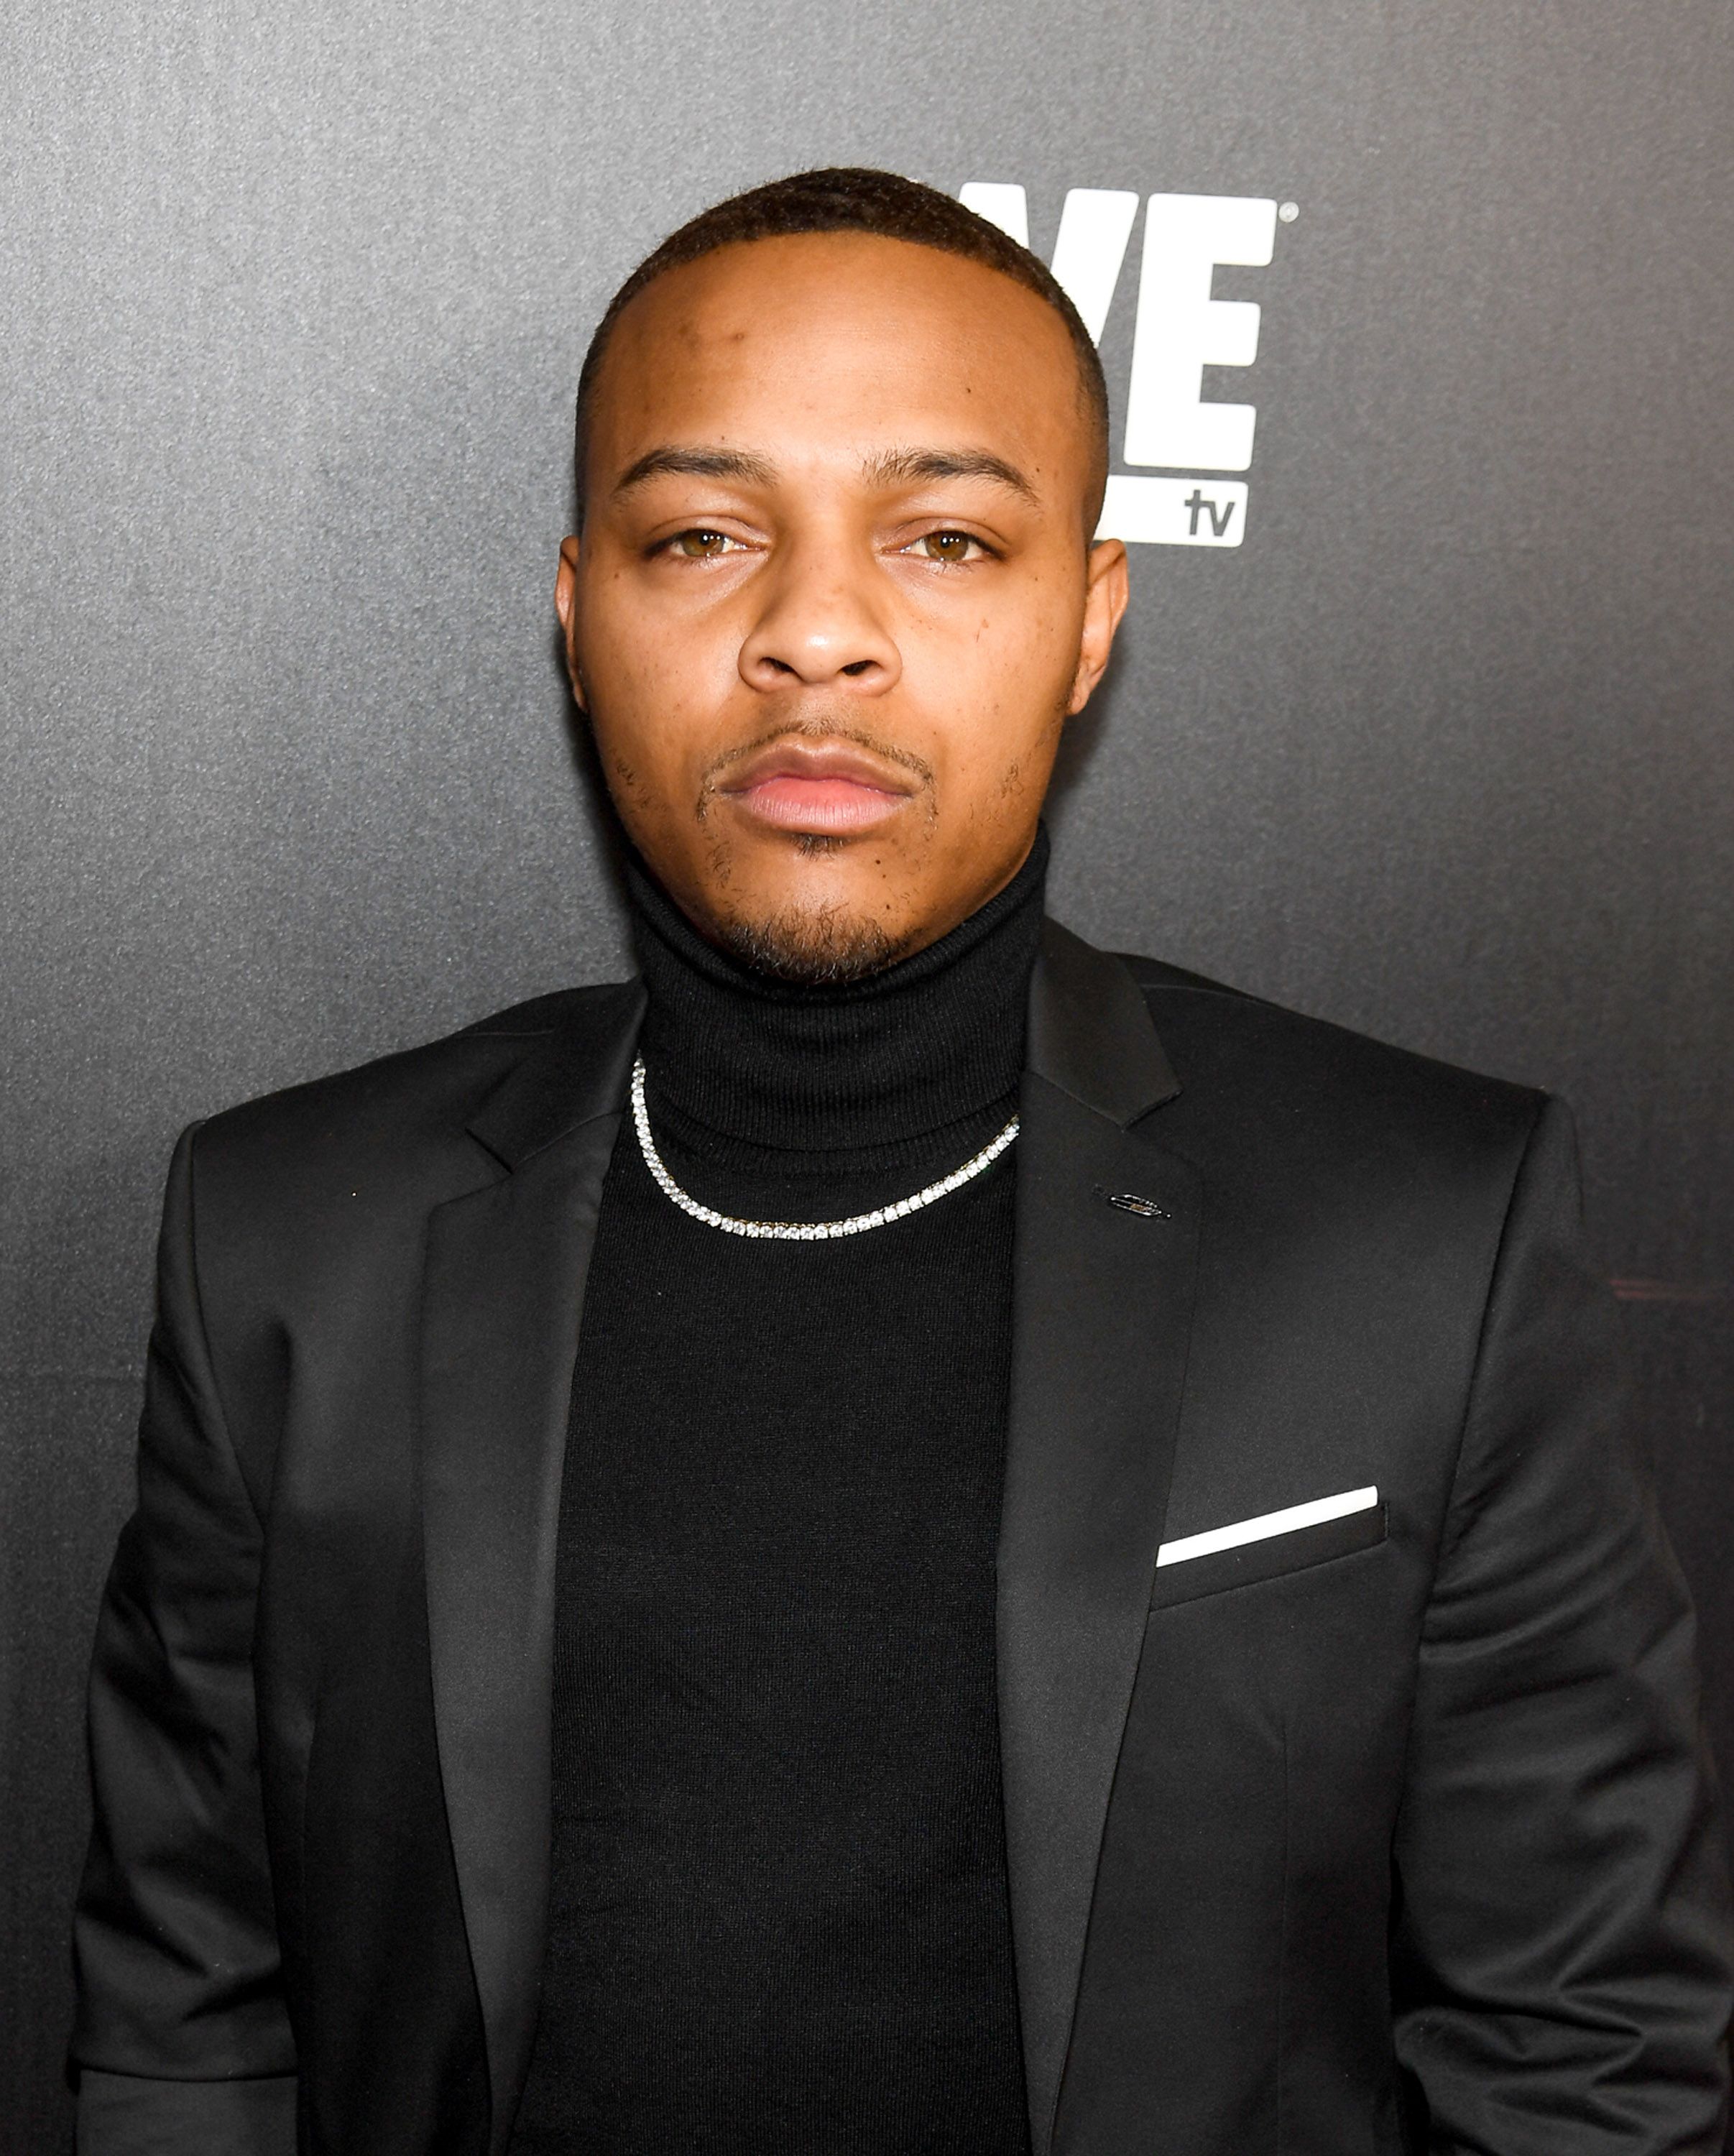 Shad Moss during the "Growing Up Hip Hop Atlanta" season 2 premiere party at Woodruff Arts Center on January 9, 2018 in Atlanta, Georgia. | Source: Getty Images